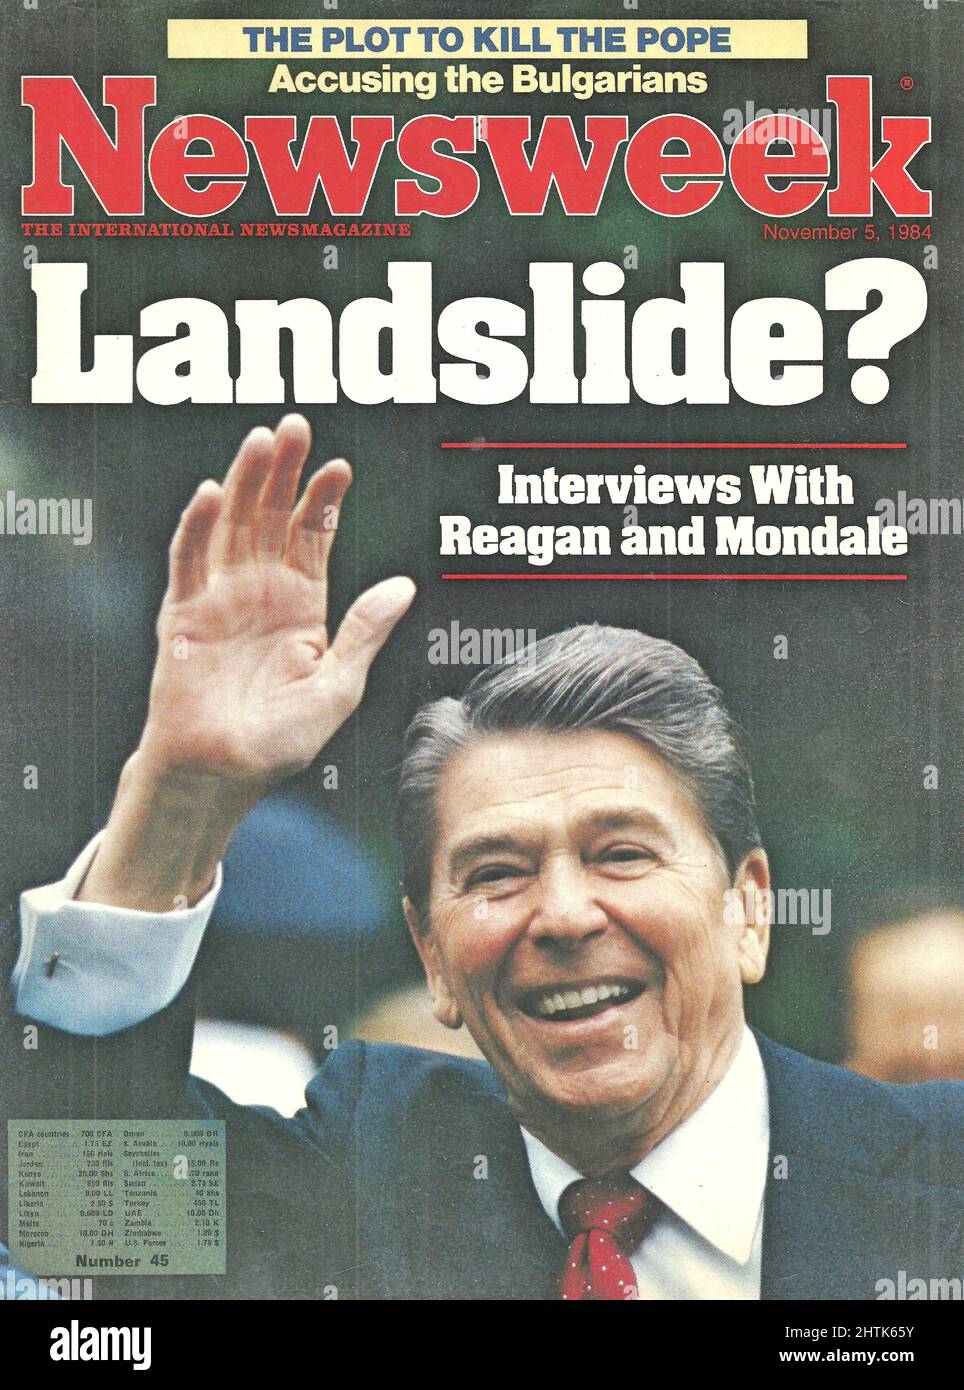 Newsweek cover November 5 1984 Interviews with Reagan and Mondale The plot to kill the pope Accusing the Bulgarians Stock Photo